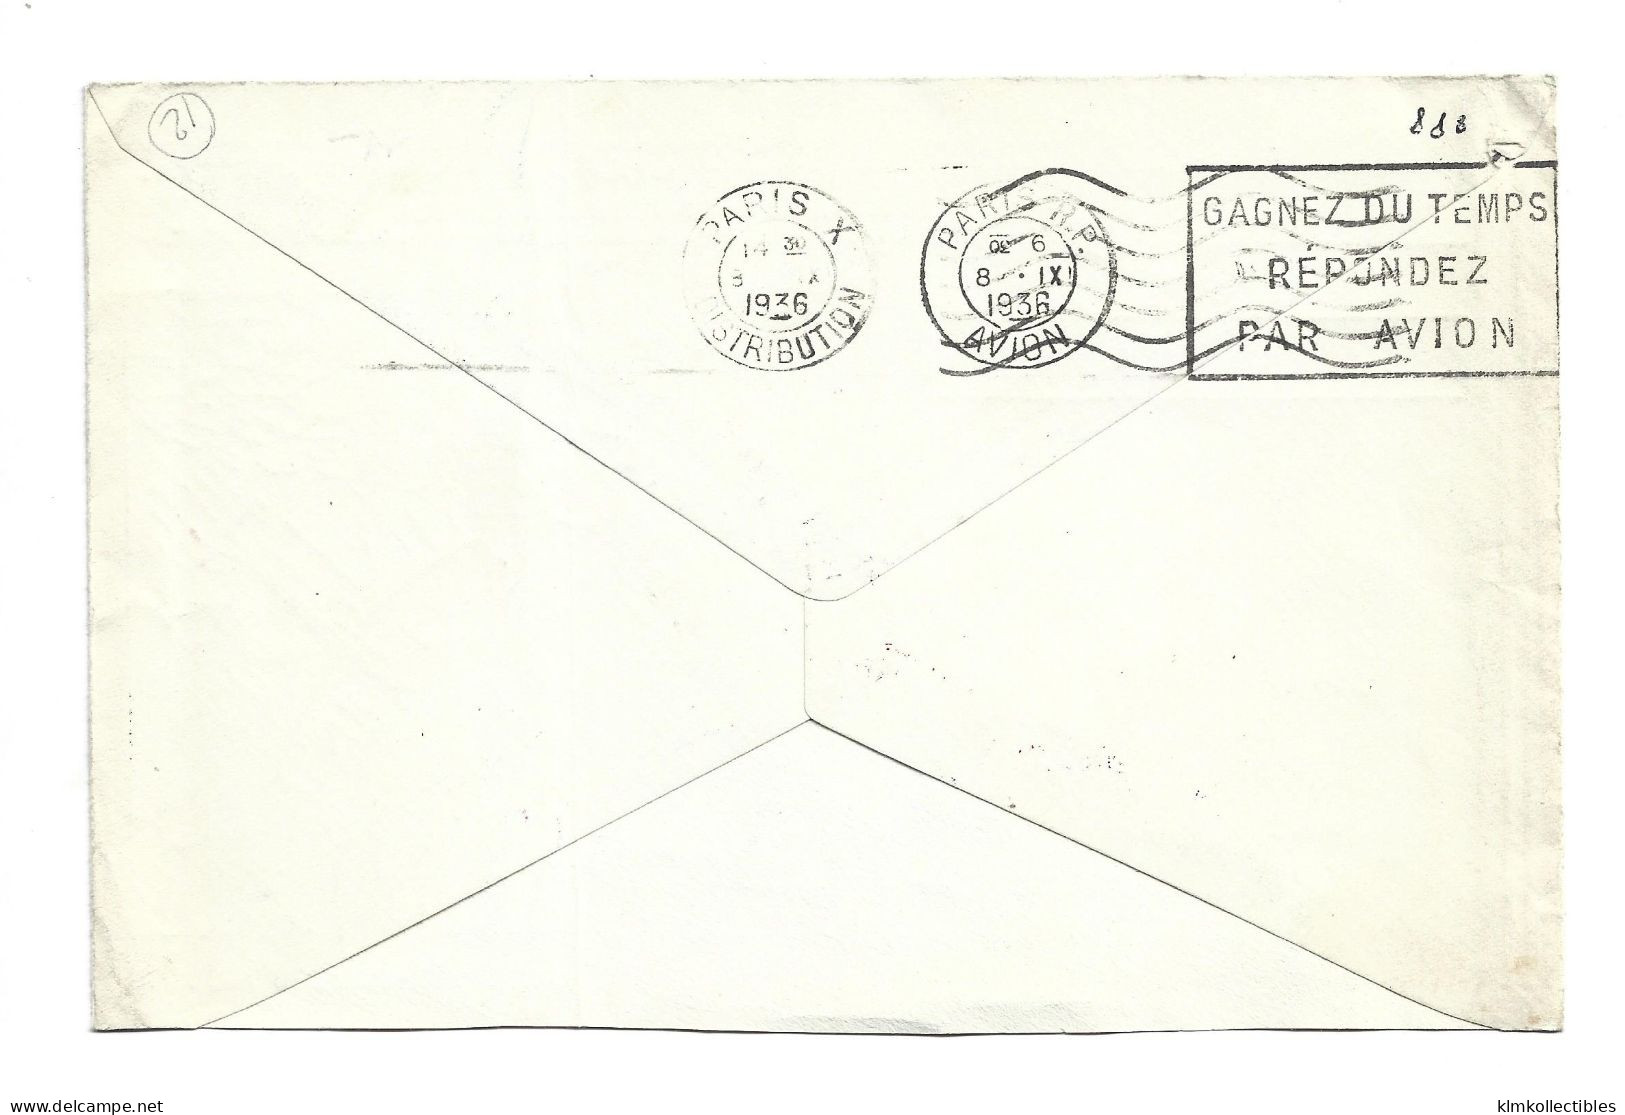 DENMARK DANMARK - AIRMAIL LUFTPOST COVER TO FRANCE - 1936 NEPA SPECIAL CANCEL FIRST 1ST FLIGHT - Luftpost